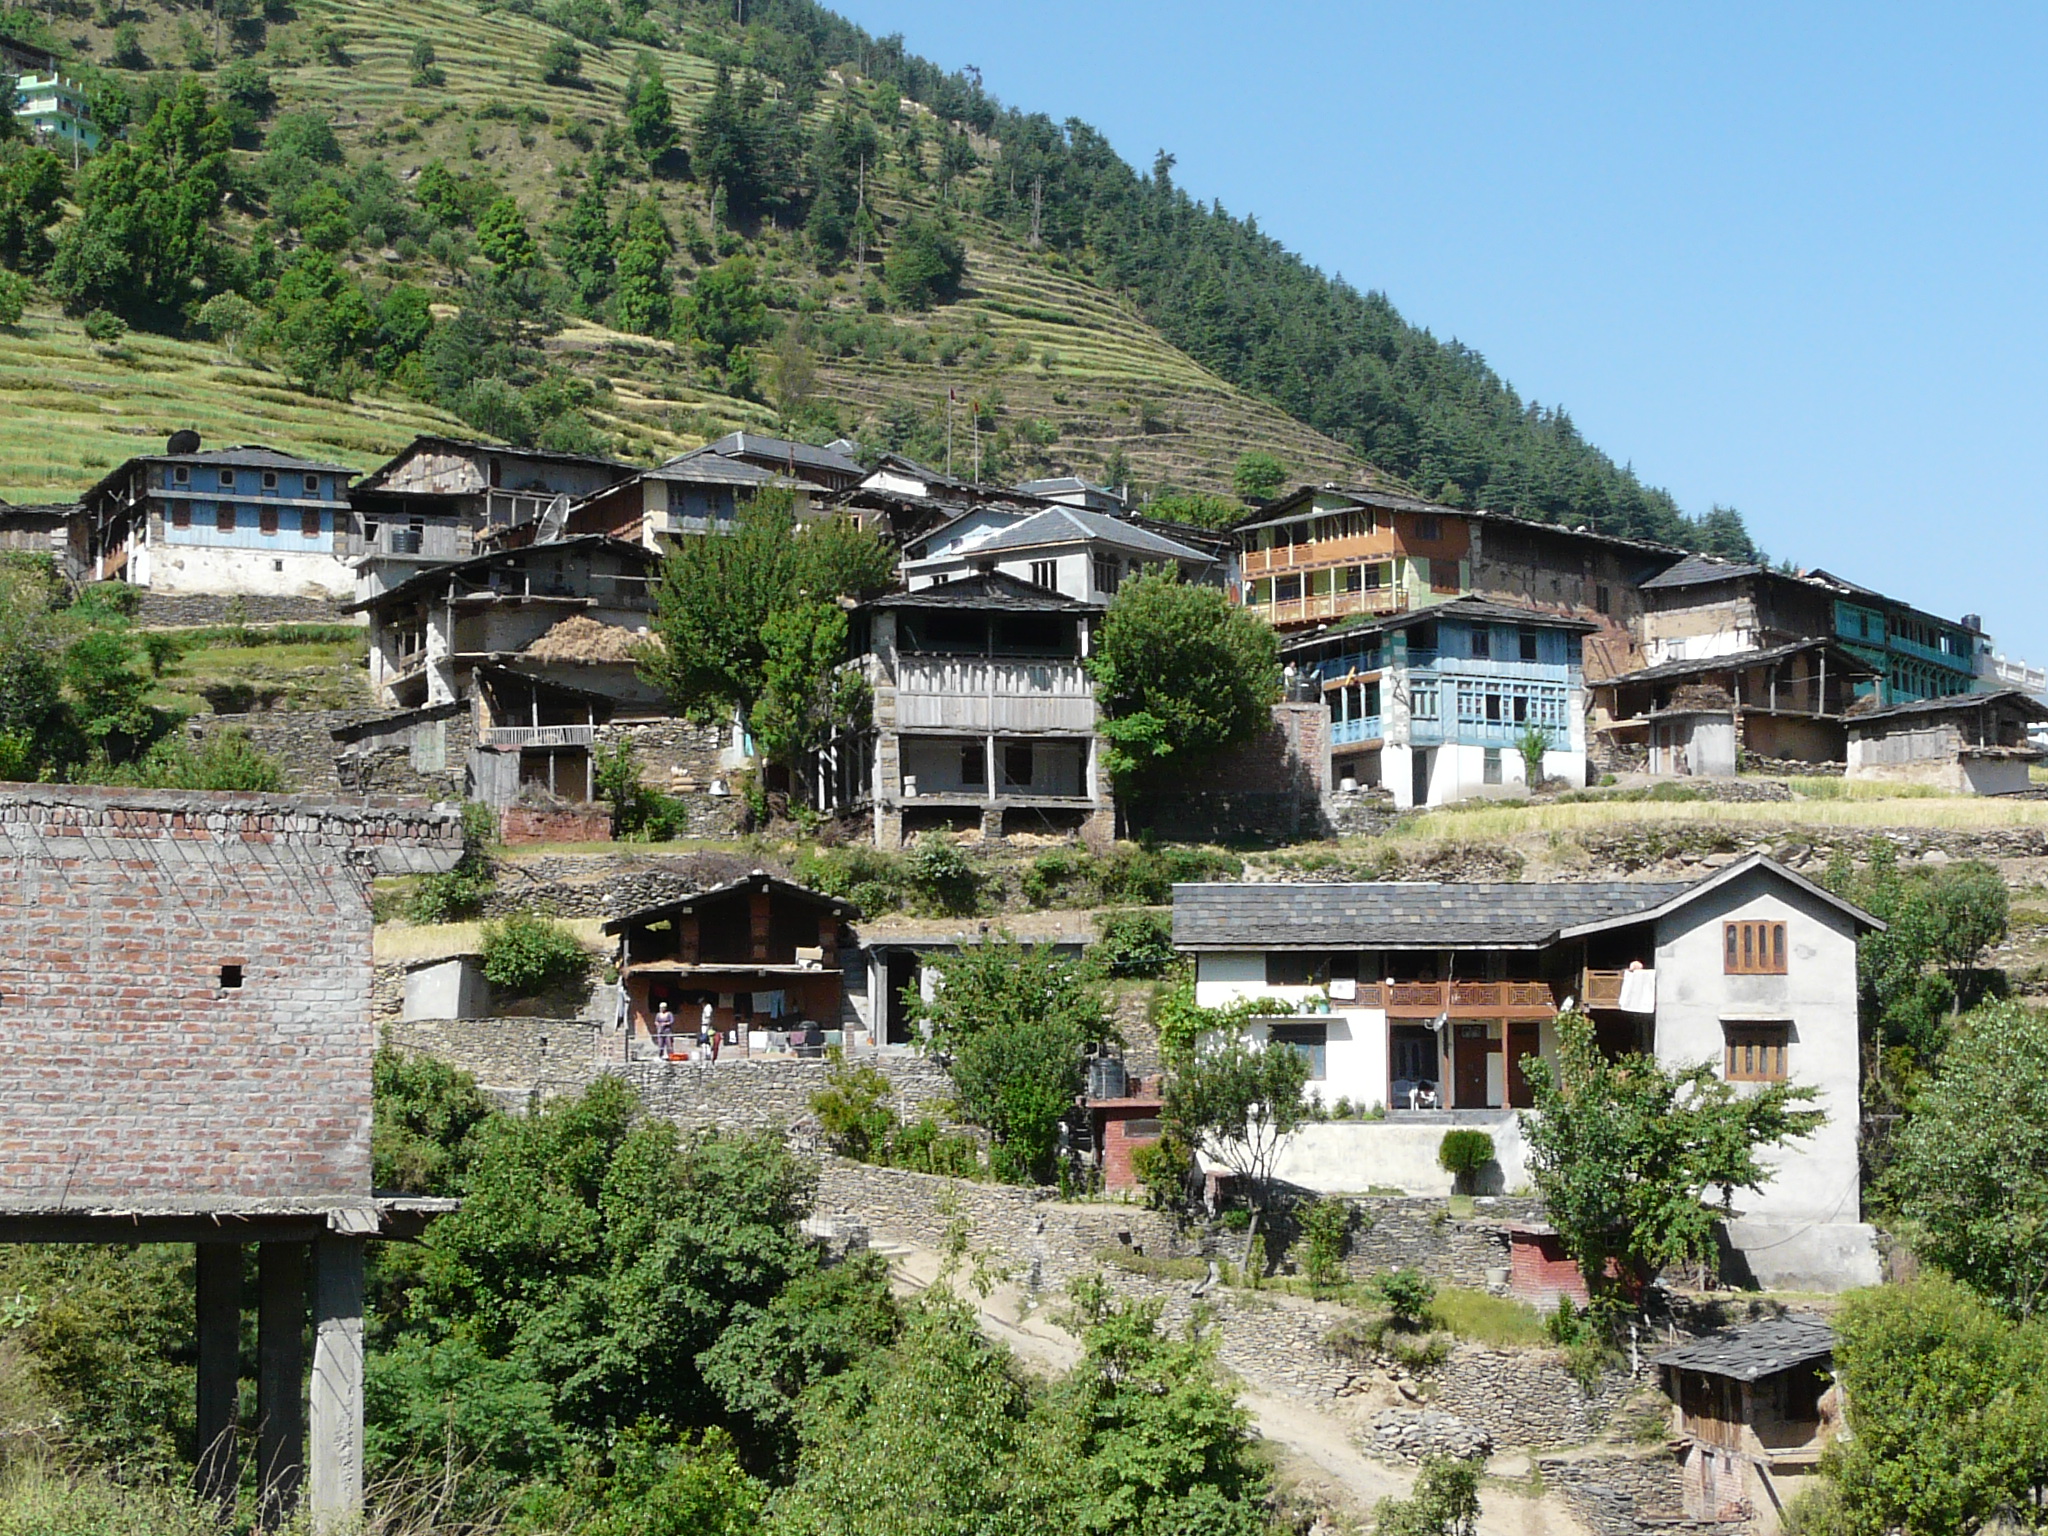 the village is situated at the top of a mountain side